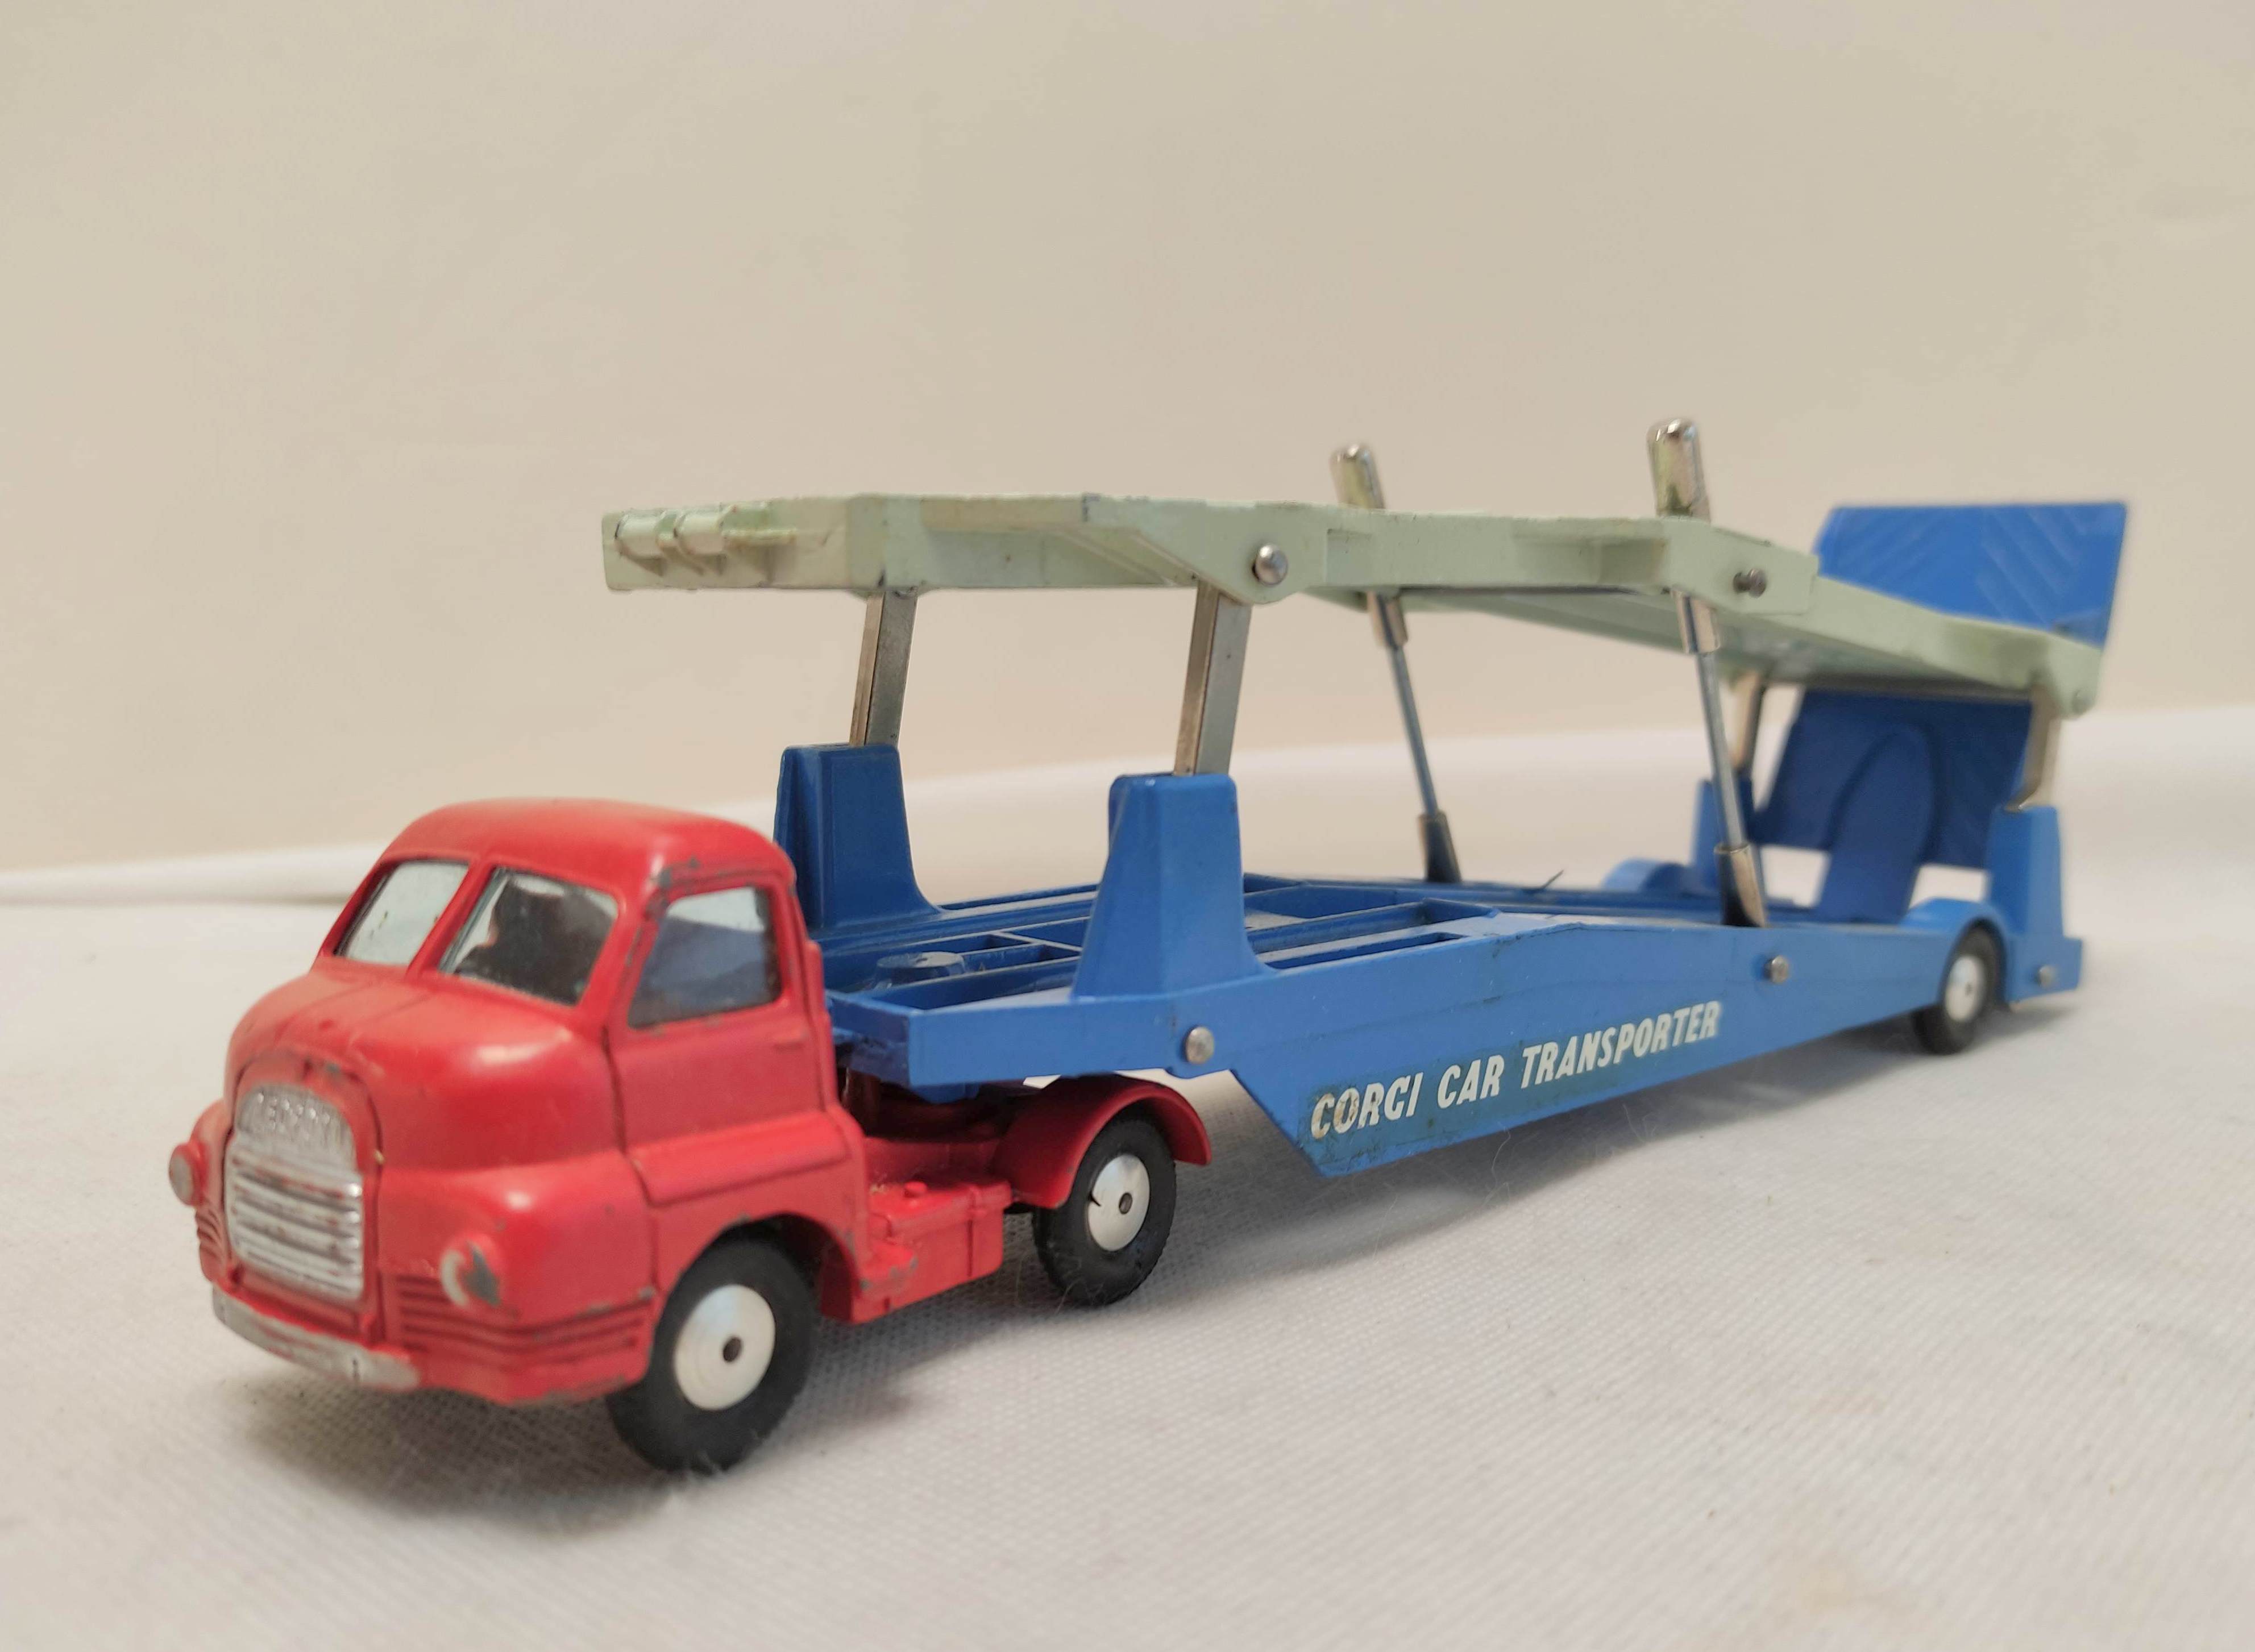 Corgi Major Toys Gift Set No.1 Carrimore Car Transporter with four Boxed Cars, consists of: Car - Image 4 of 12